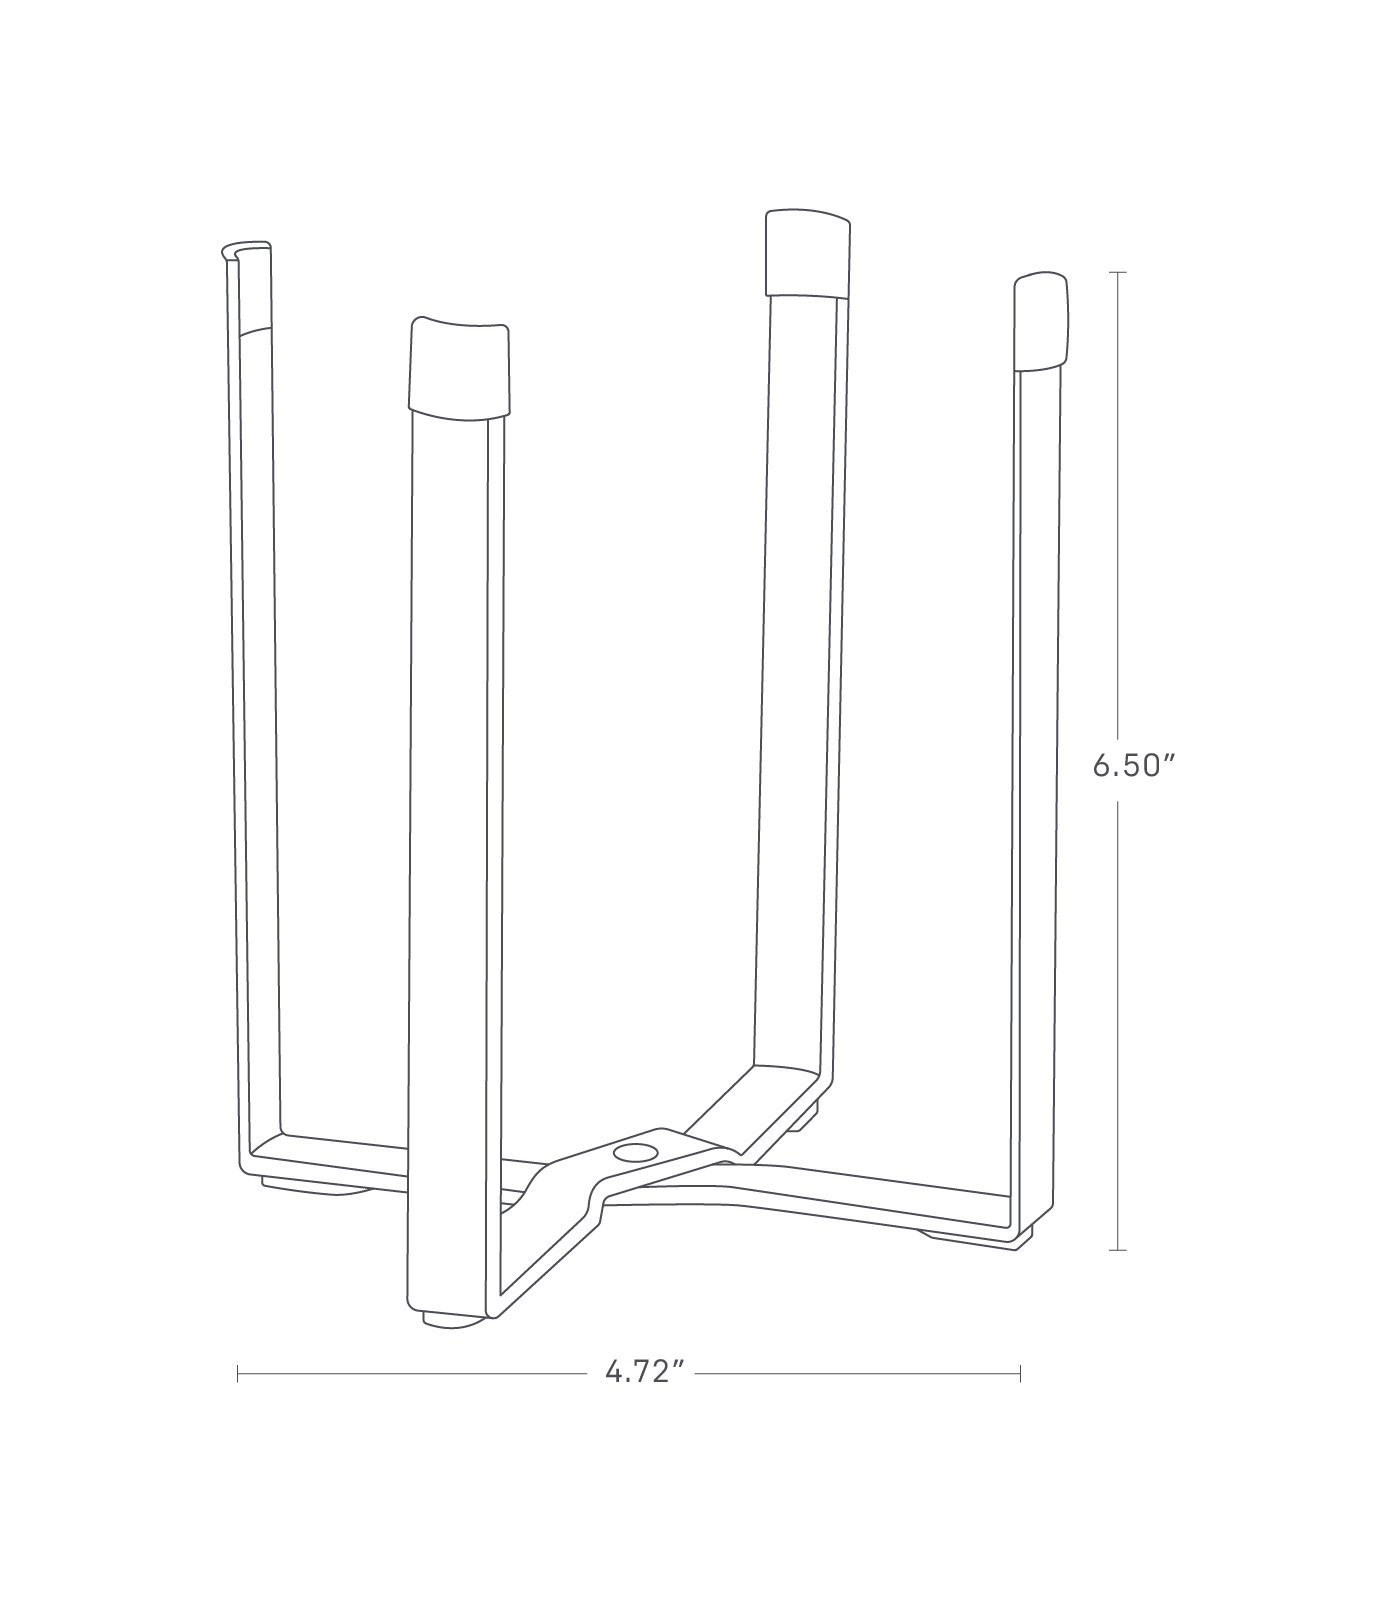 Dimension image for Collapsible Bottle Dryer showing width of 4.72